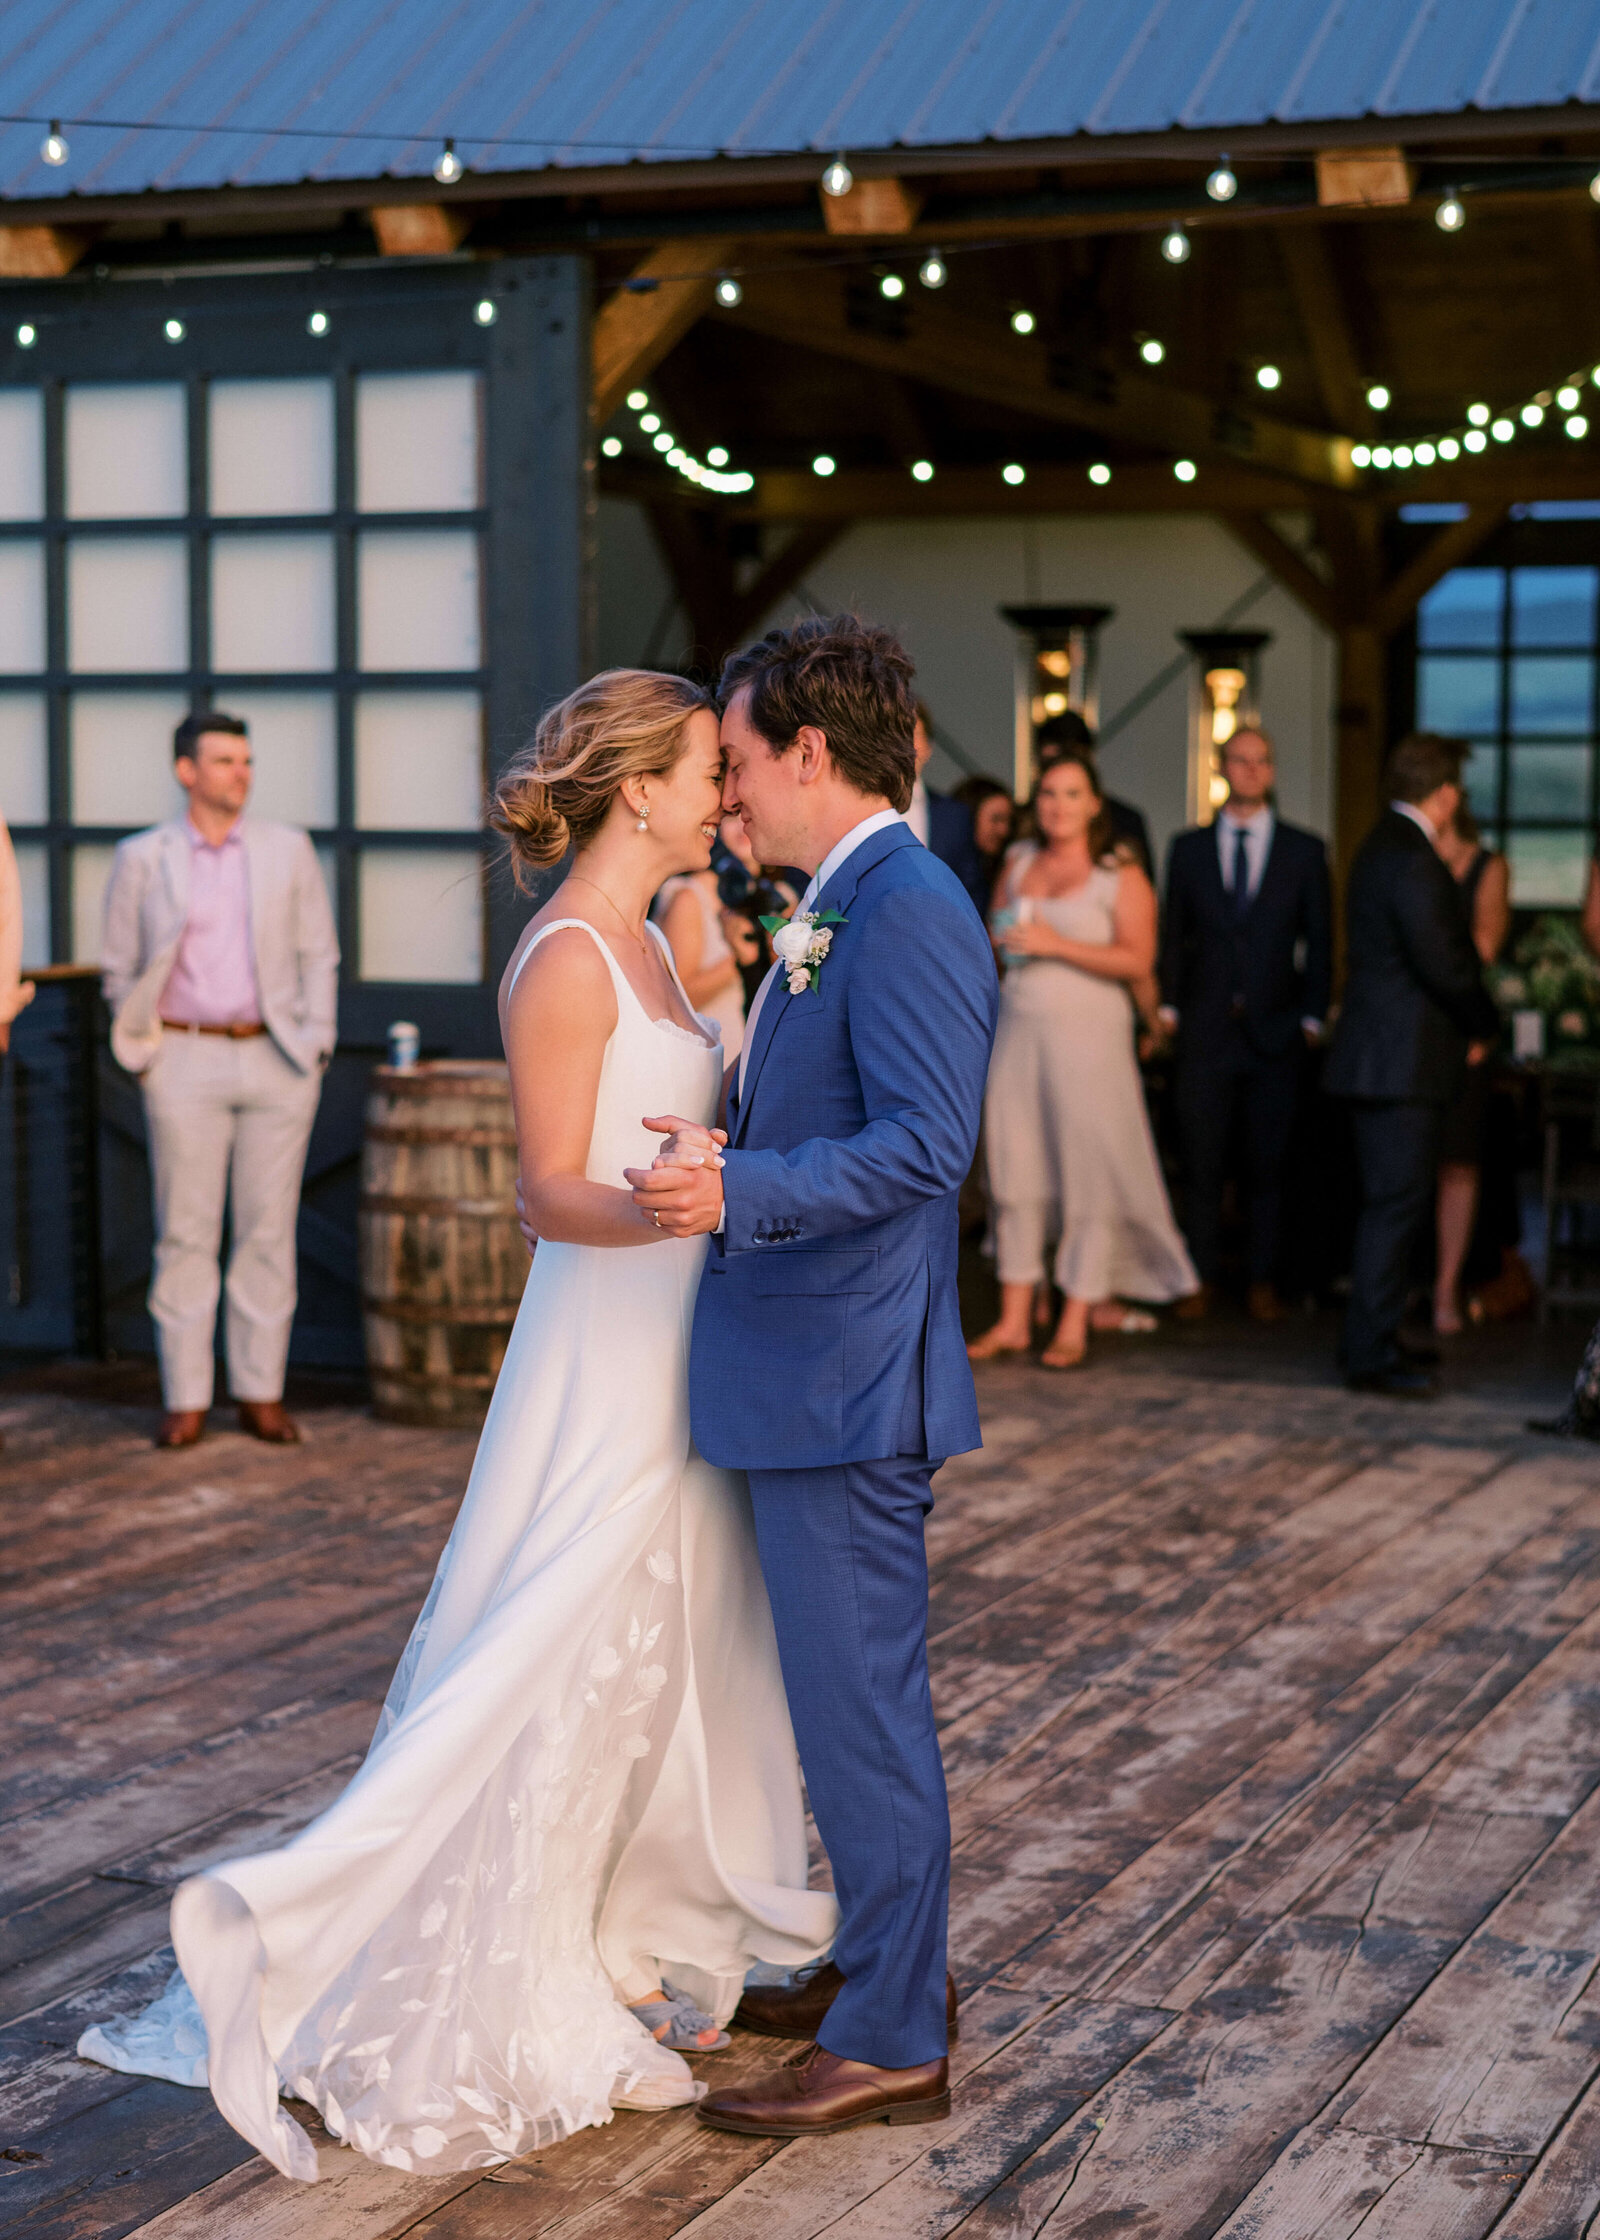 An emotional first dance is shared outdoors by the bride and groom, photograph captured by Virginia wedding photographer